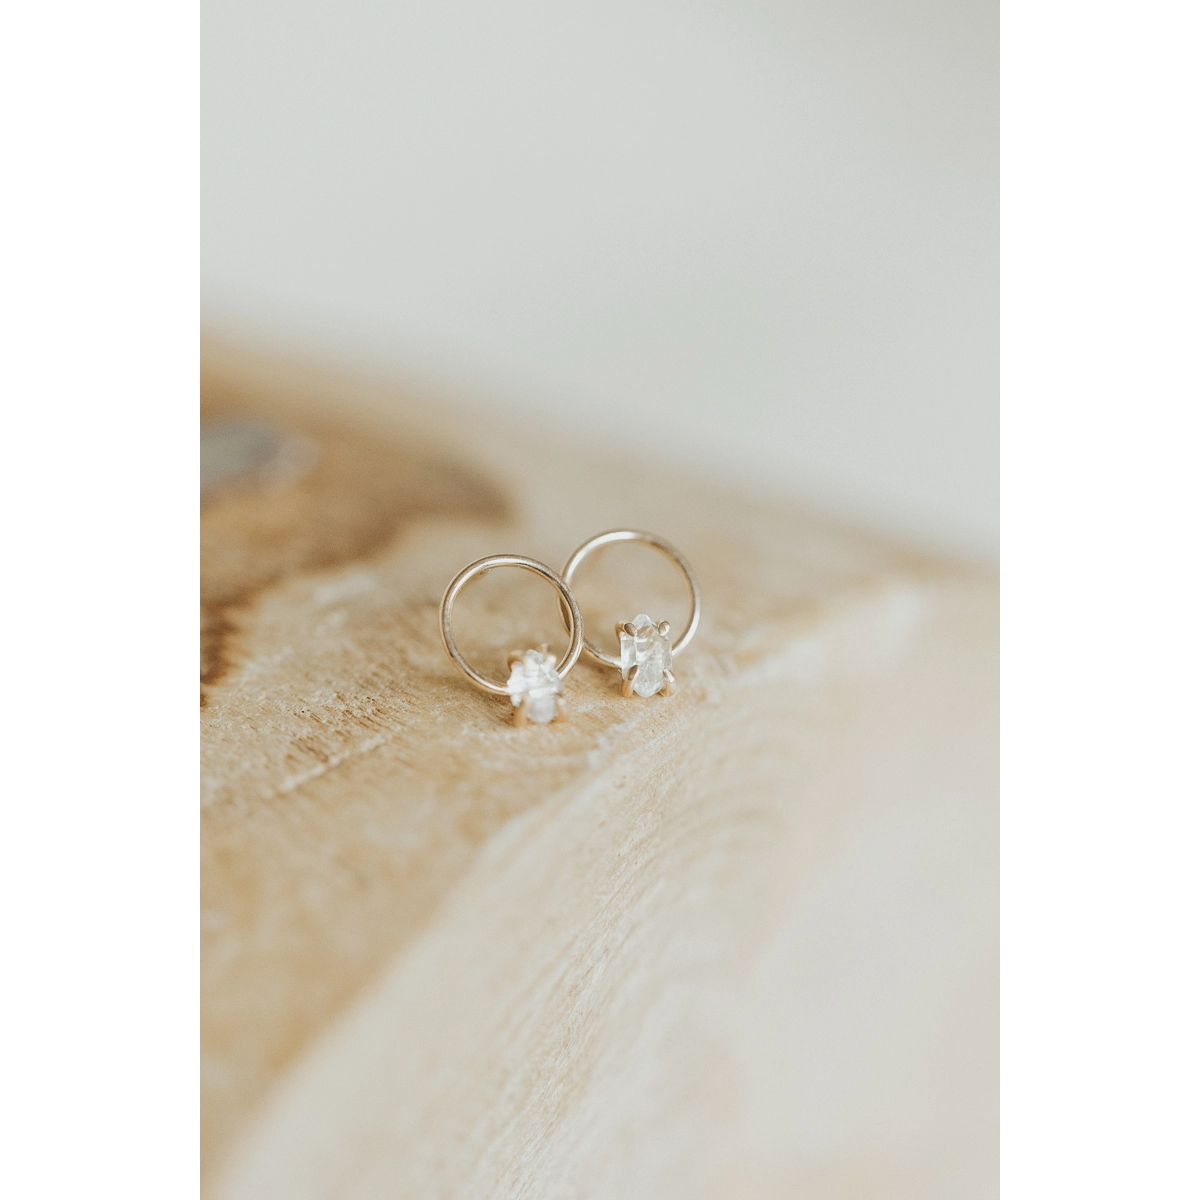 Herkimer Circle Studs - 8mm - Gold Filled - Sterling Silver Posts - Mellow Monkey